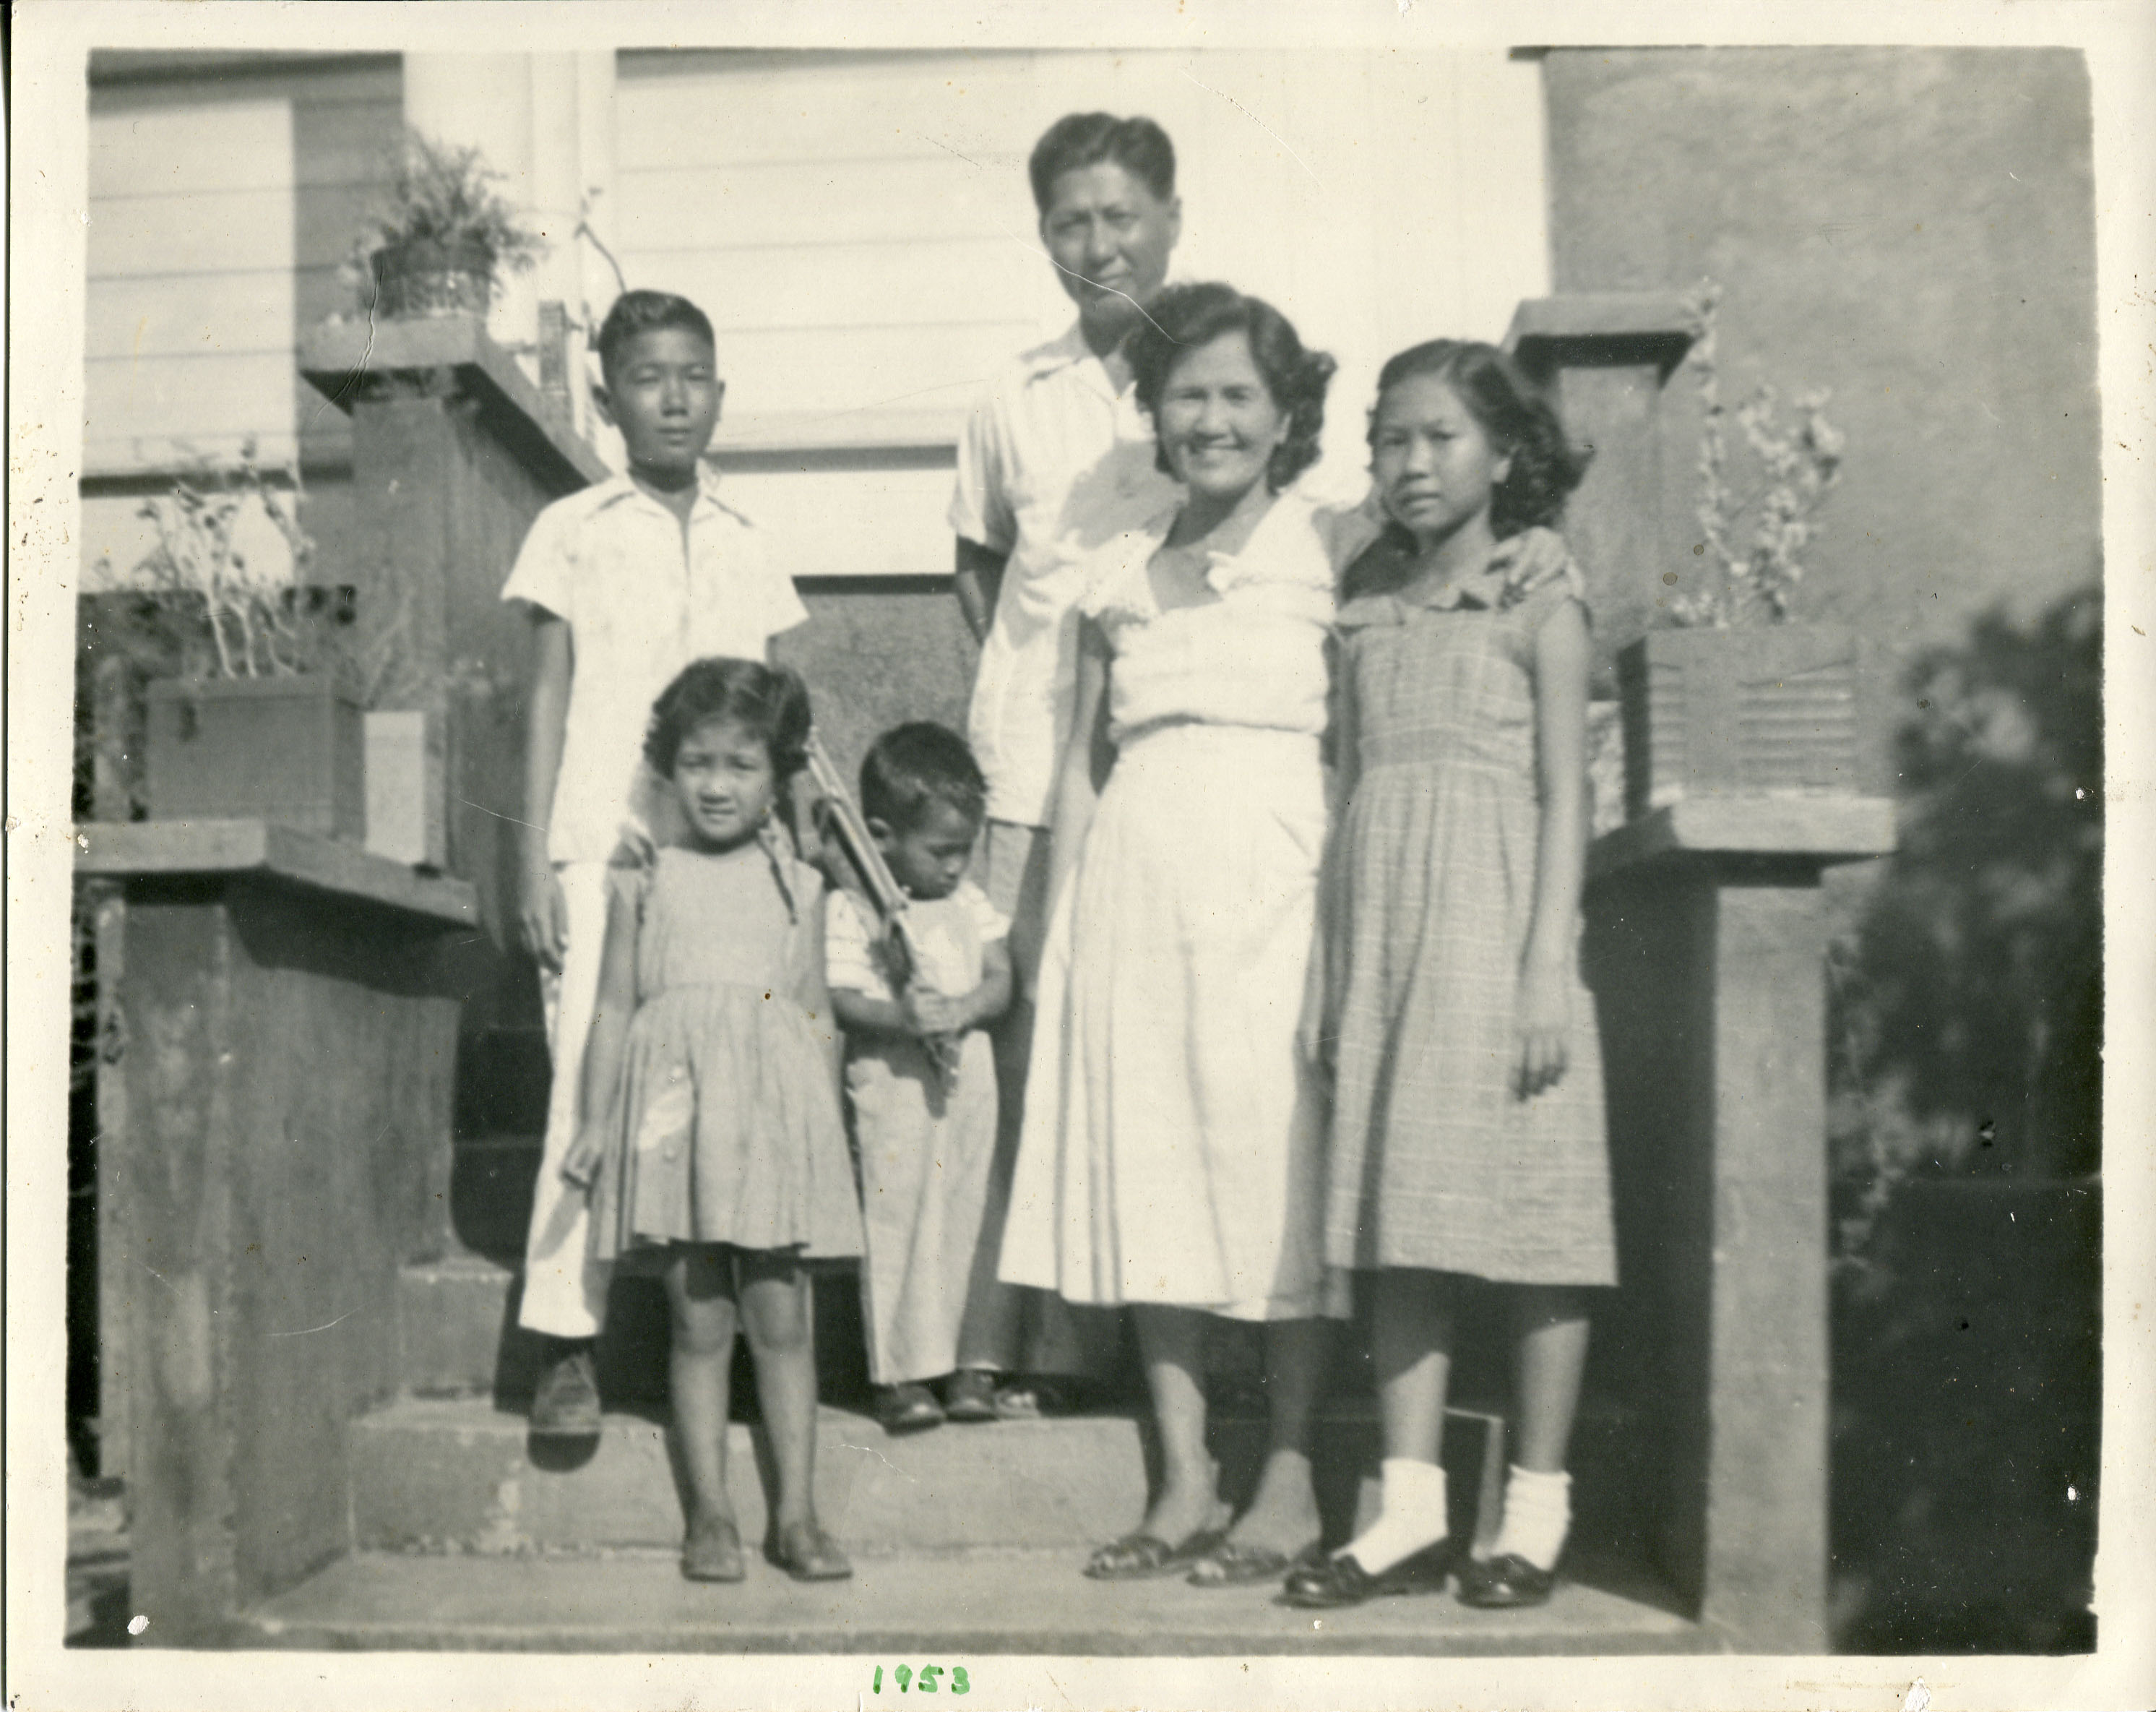 Family photo 1953 owned by Etta McKenna.1953 photo of family standing on the steps in front of our old house. Parents: Hermogenes Escarrilla (father) and mother Felicula Escarrilla. Brothers Efrain, Ernie. Sister EdnaNotes from Sarah Carlson, in discussion with McKenna: “Important to me because this is the only copy saved as all photos were destroyed due to termite infestation. That is why I want this digitized. Also makes me reminisce of all the things I did growing up in the house. Any views, findings, conclusions, or recommendations expressed in this story do not necessarily represent those of the National Endowment for the Humanities. (c) Field Museum of Natural History - CC BY-NC 4.0